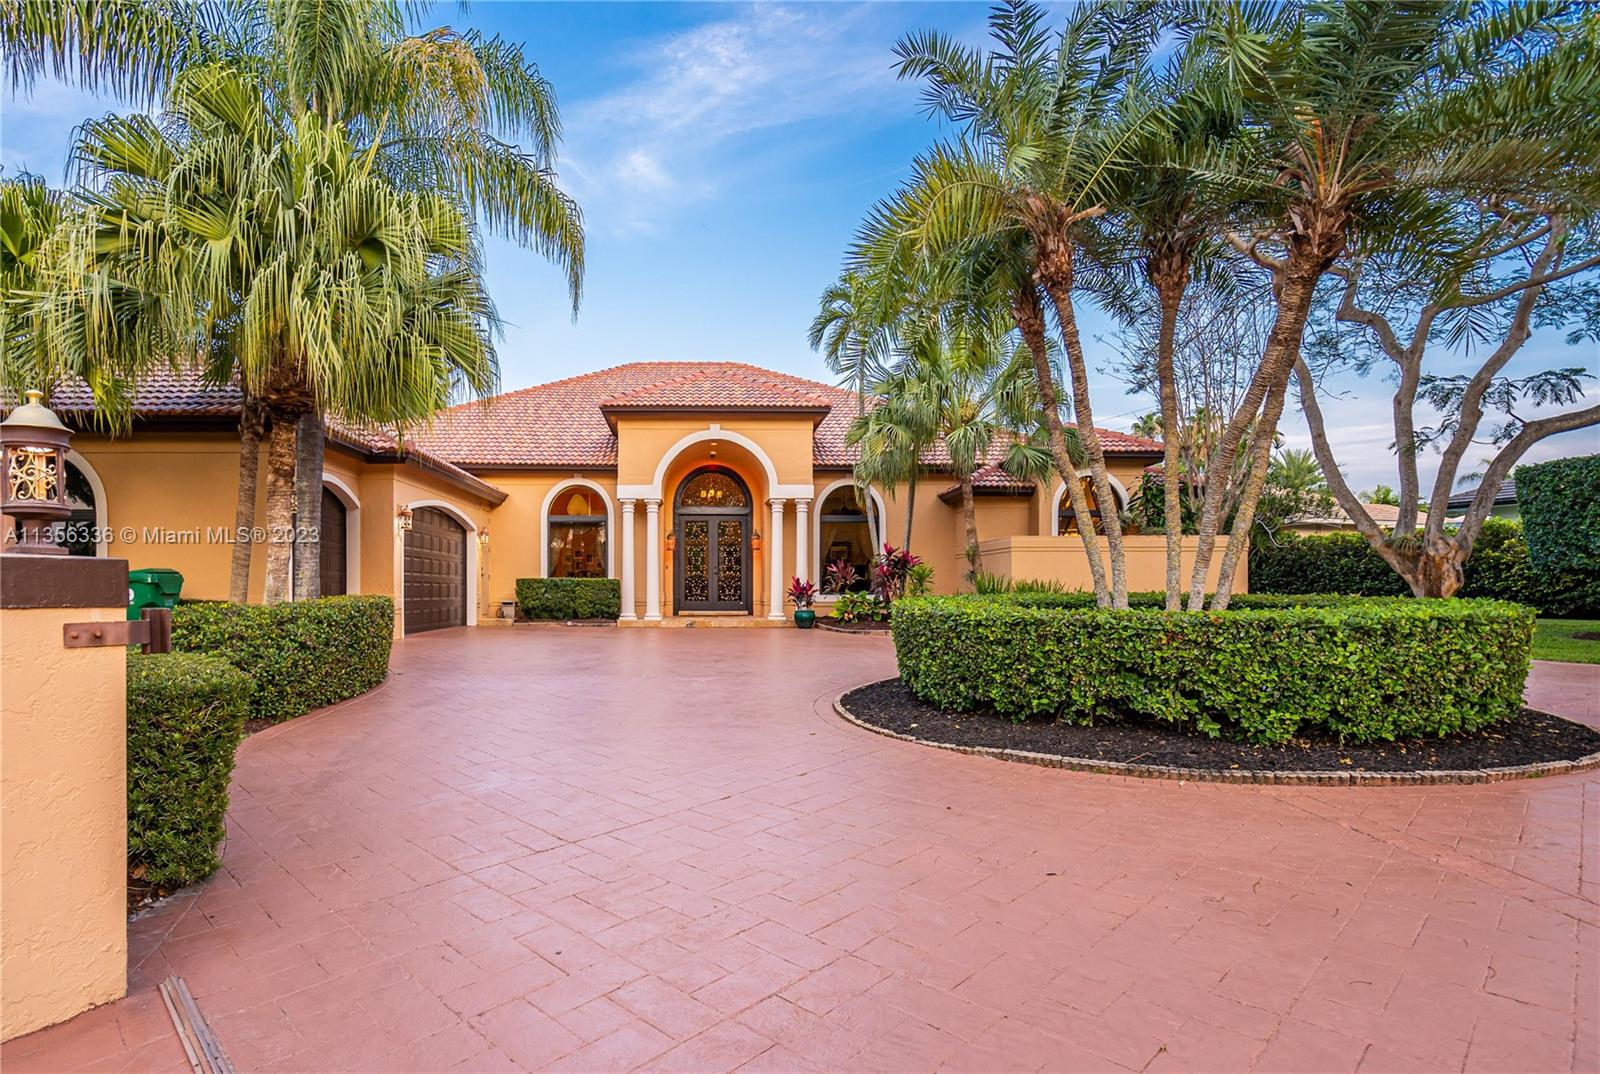 Contemporary Mediterranean with great scale/style - vaulted tray ceilings - 8’ solid core 4 hinge doors. Gated entry, circle driveway to 3 car garage. Security/privacy with 7 ft. concrete wall surrounding this 4BR/3.1BA home. Ideally located in quiet neighborhood, only 6-minute walk to Starbucks, fine Italian restaurant, Deering Estate, gas stations and Dixie Hwy 2 miles. Excellent floor plan with perfectly scaled rooms and marble/wood floors throughout. Gourmet kitchen opens to billiards room, bar area and expansive family room overlooking tropical heated pool. Fabulous primary suite with French doors to spectacular outdoor living spaces. Move-in ready with new Mediterranean tile roof, new hurricane windows and doors, new 3-AC, indoor/outdoor are freshly painted...an exceptional property!